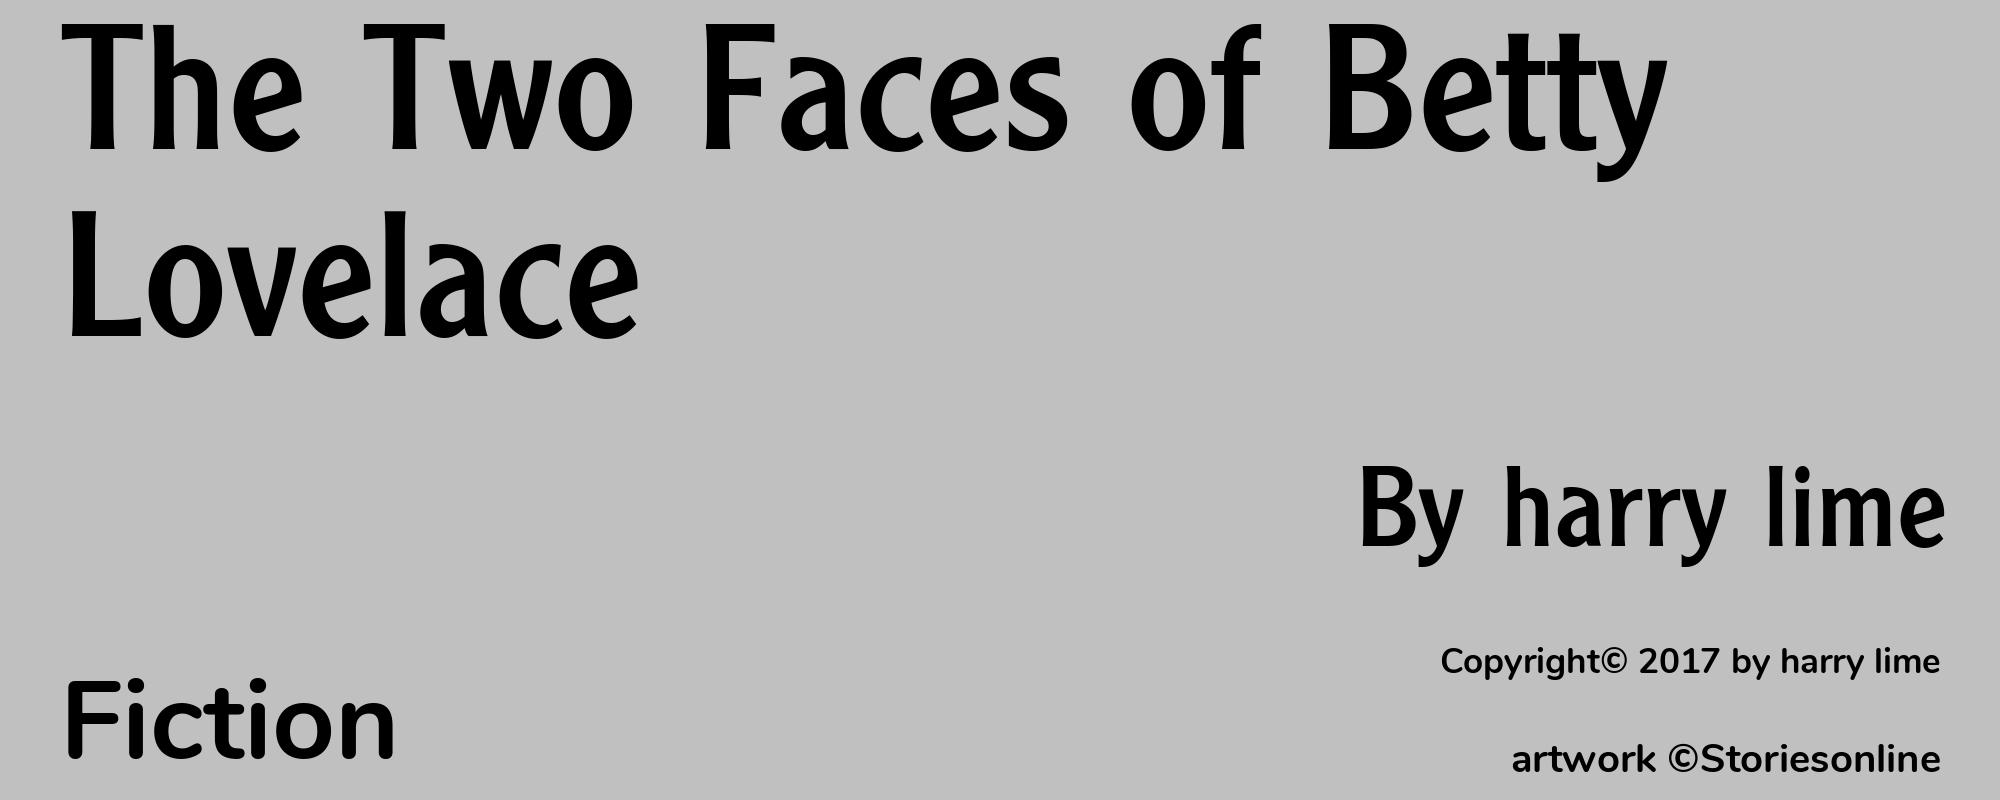 The Two Faces of Betty Lovelace - Cover